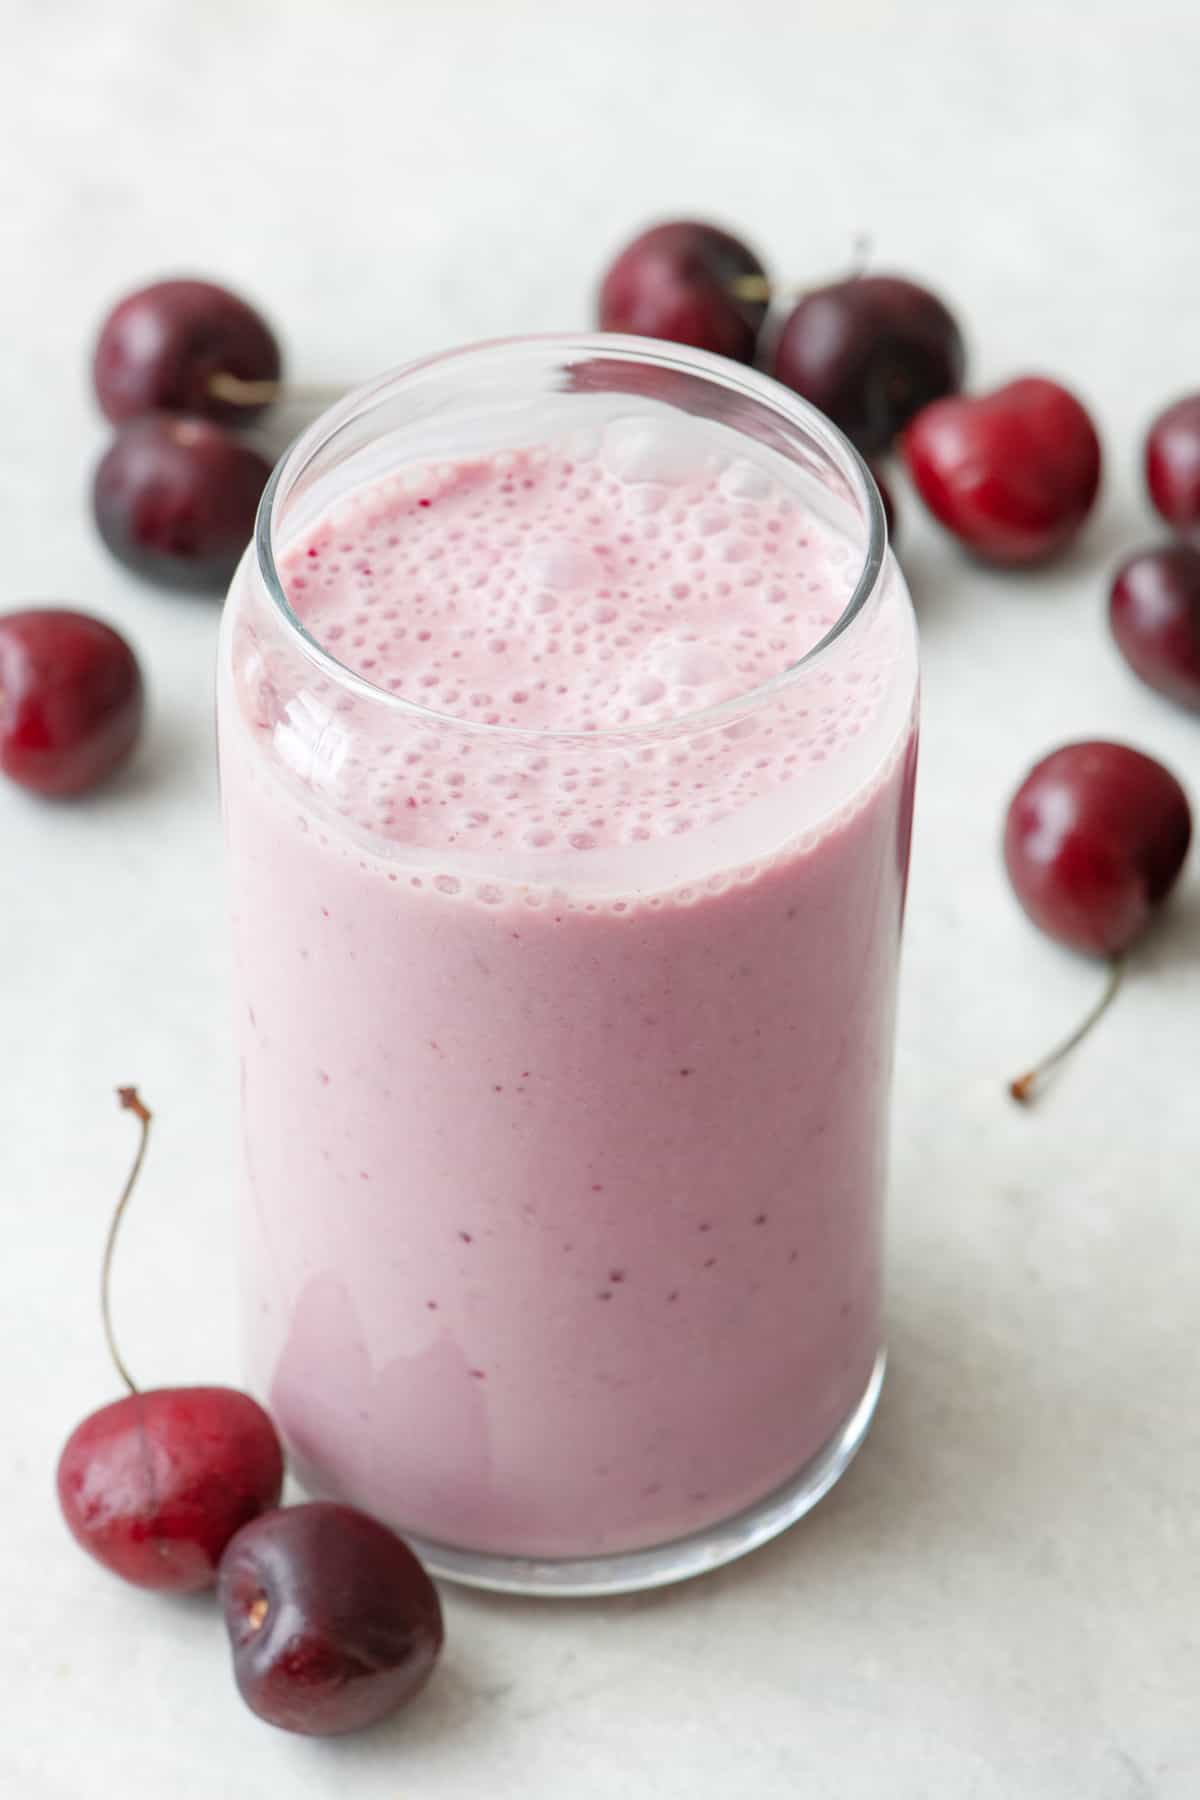 Glass of cherry smoothie surrounded by cherries.